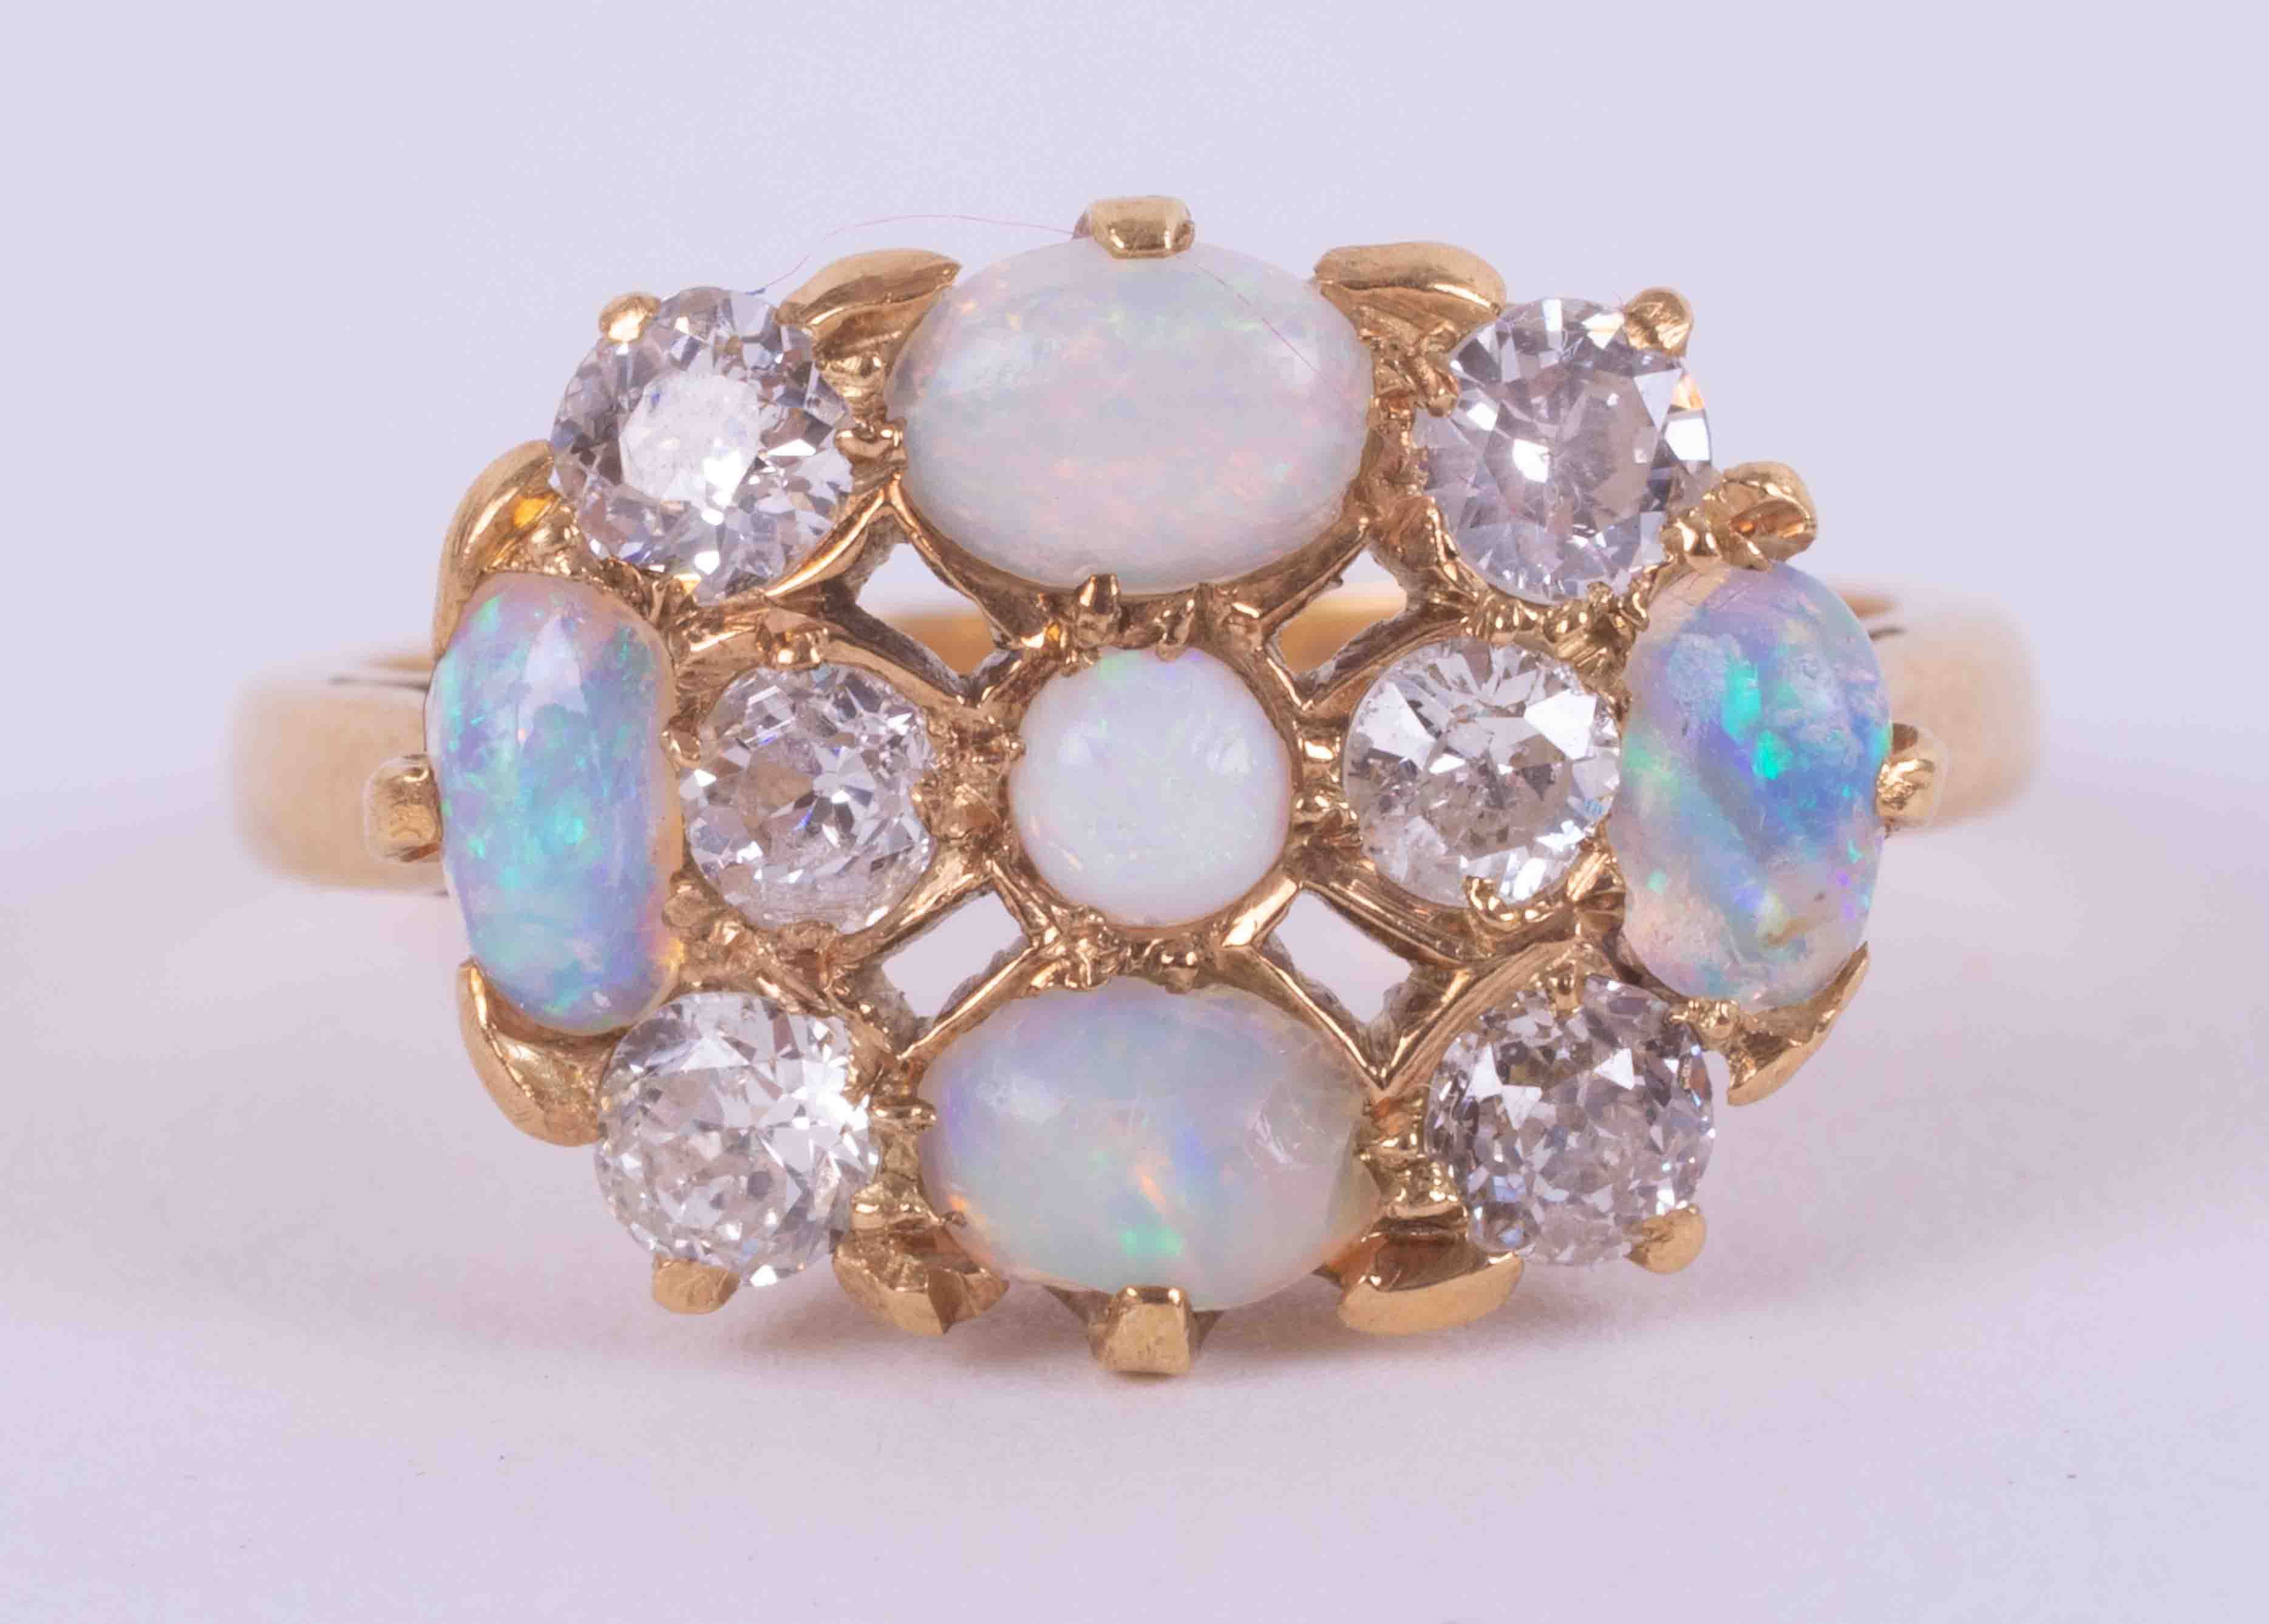 An 18ct yellow gold cluster style ring set with four oval cabochon cut white opals and a